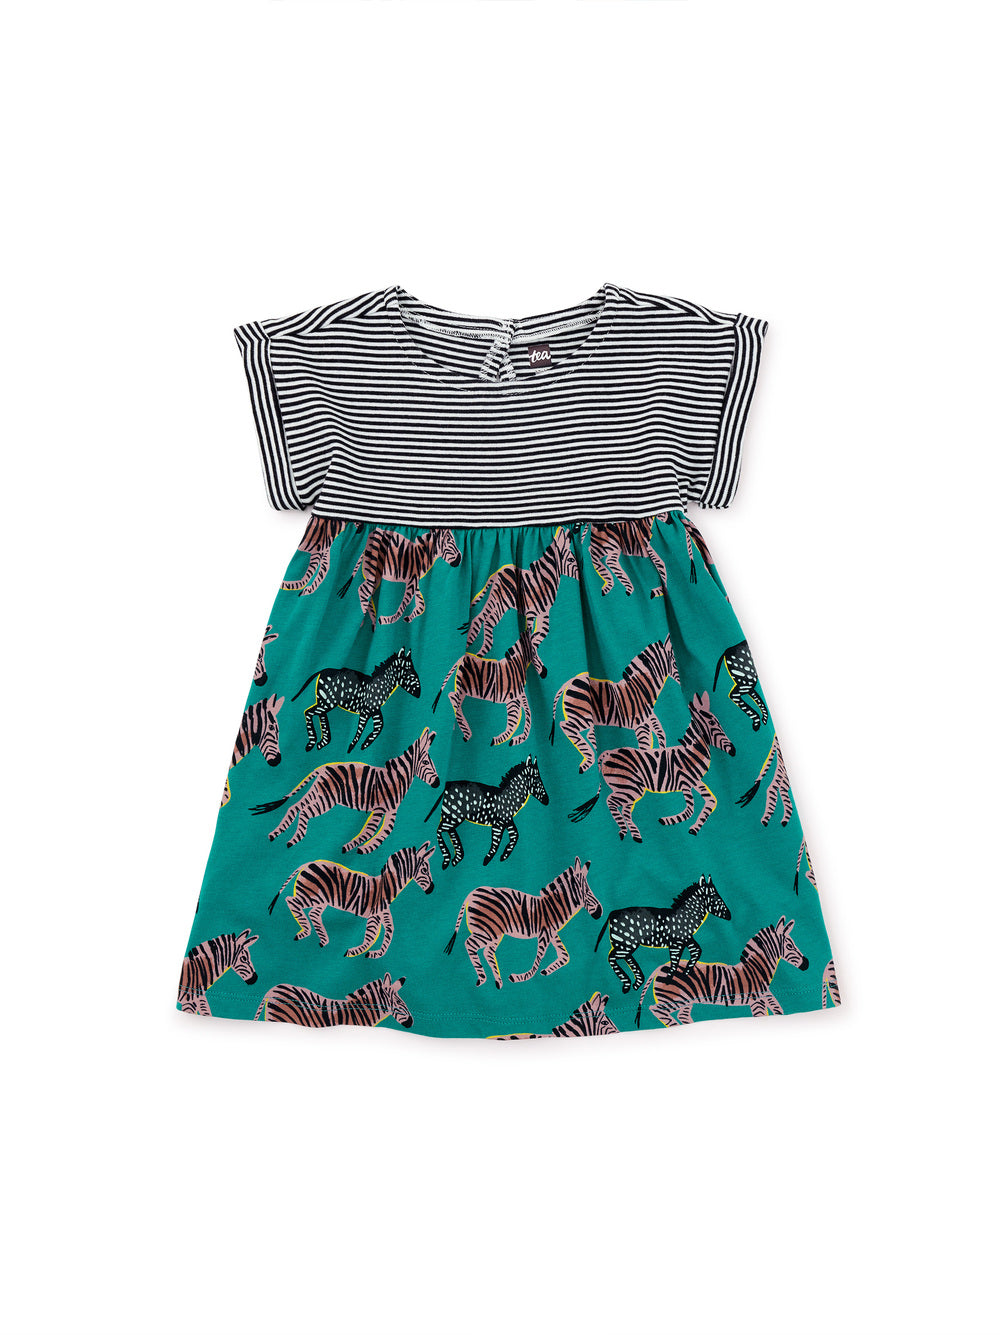 Mixed Print Empire Baby Dress: A Dazzle of Zebras